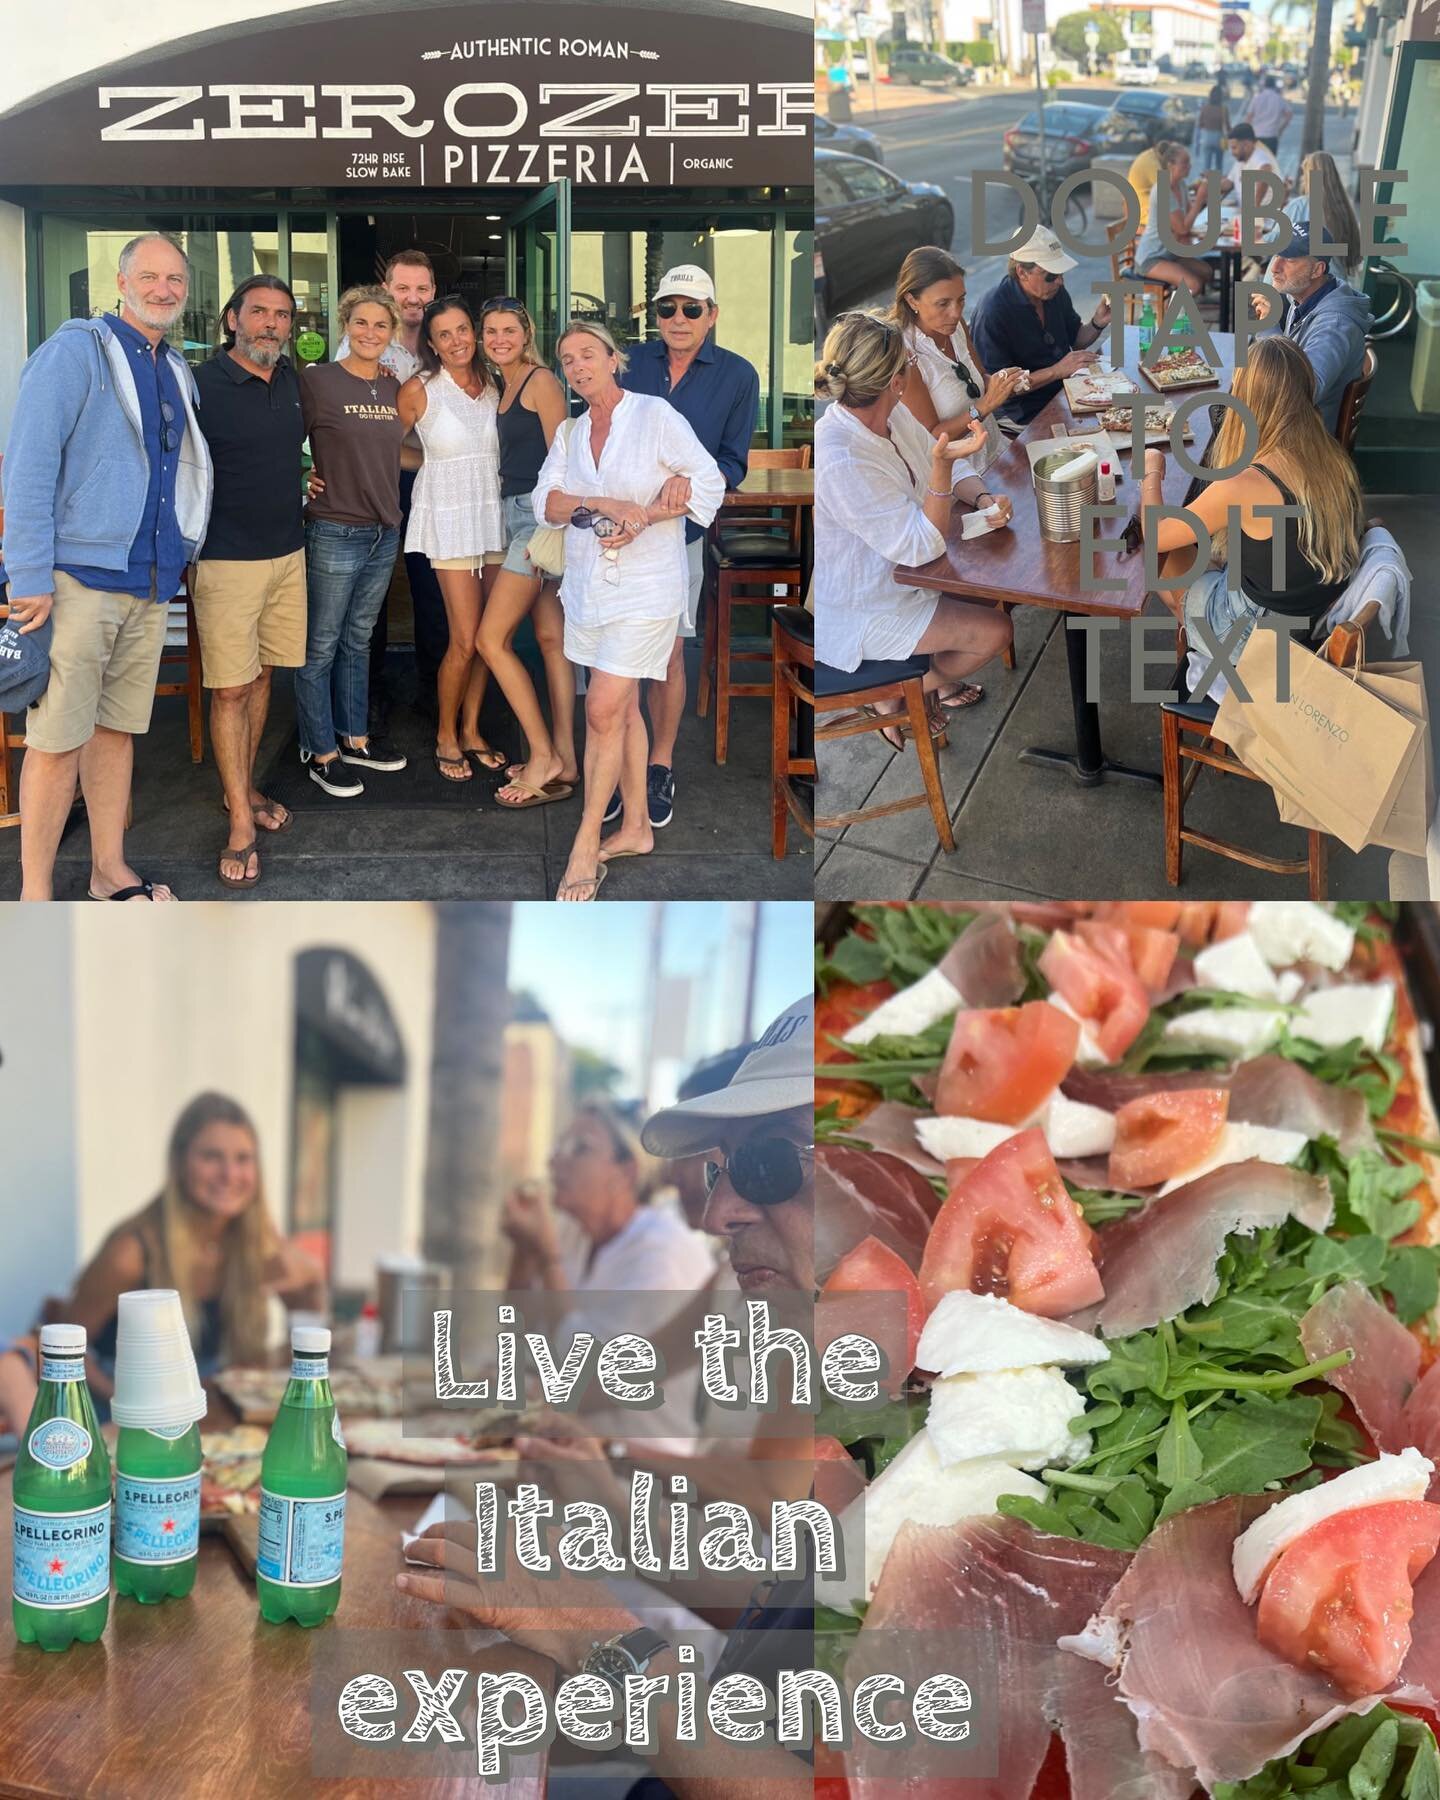 #asliceofrome  a slice of Rome in #surfcity #surfcityusa live the Italian experience in so cal.  The only #authentic #authenticromanpizza in #southerncalifornia where #pizza is #made from #italian and it&rsquo;s serve from #italians you&rsquo;ll enjo